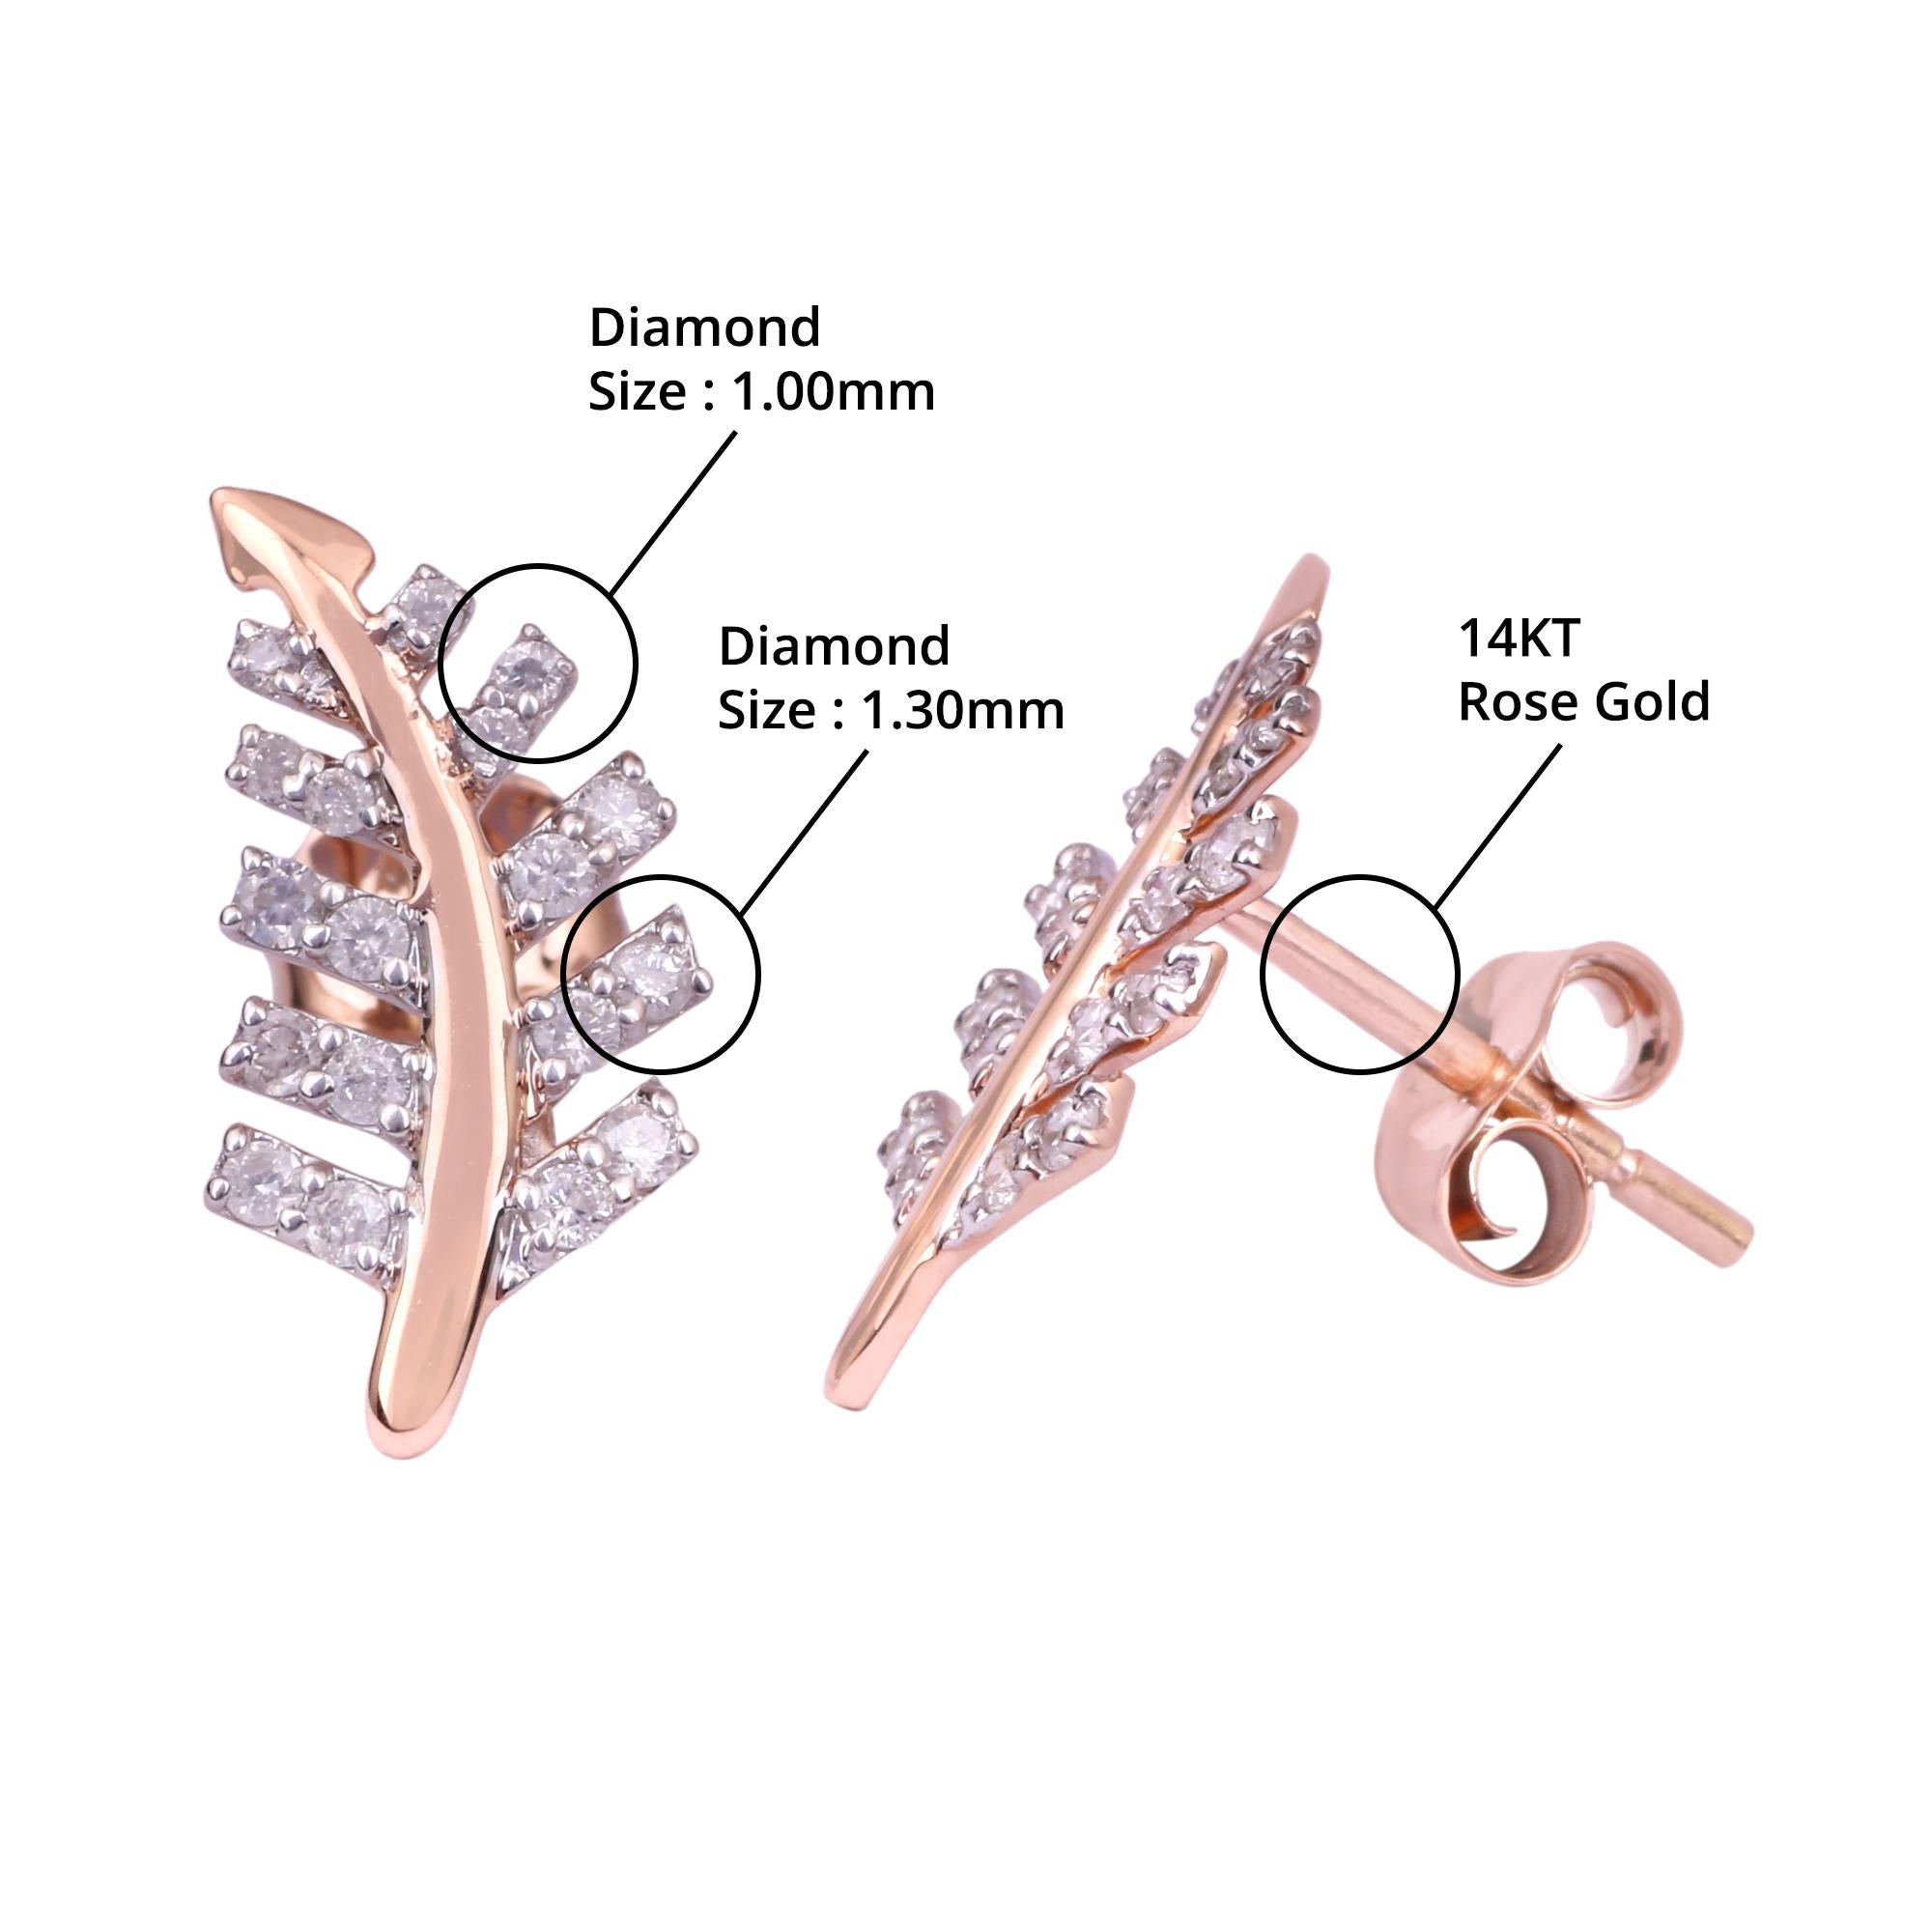 Item details:-

✦ SKU:- JER00712RRR

✦ Material :- Gold

✦ Metal Purity : 14K Rose Gold 

✦ Gemstone Specification:-
✧ Clear Diamond (l1/HI) Round - 1mm - 12 Pcs
✧ Clear Diamond (l1/HI) Round - 1.30mm - 24 Pcs


✦ Approx. Diamond Carat Weight :